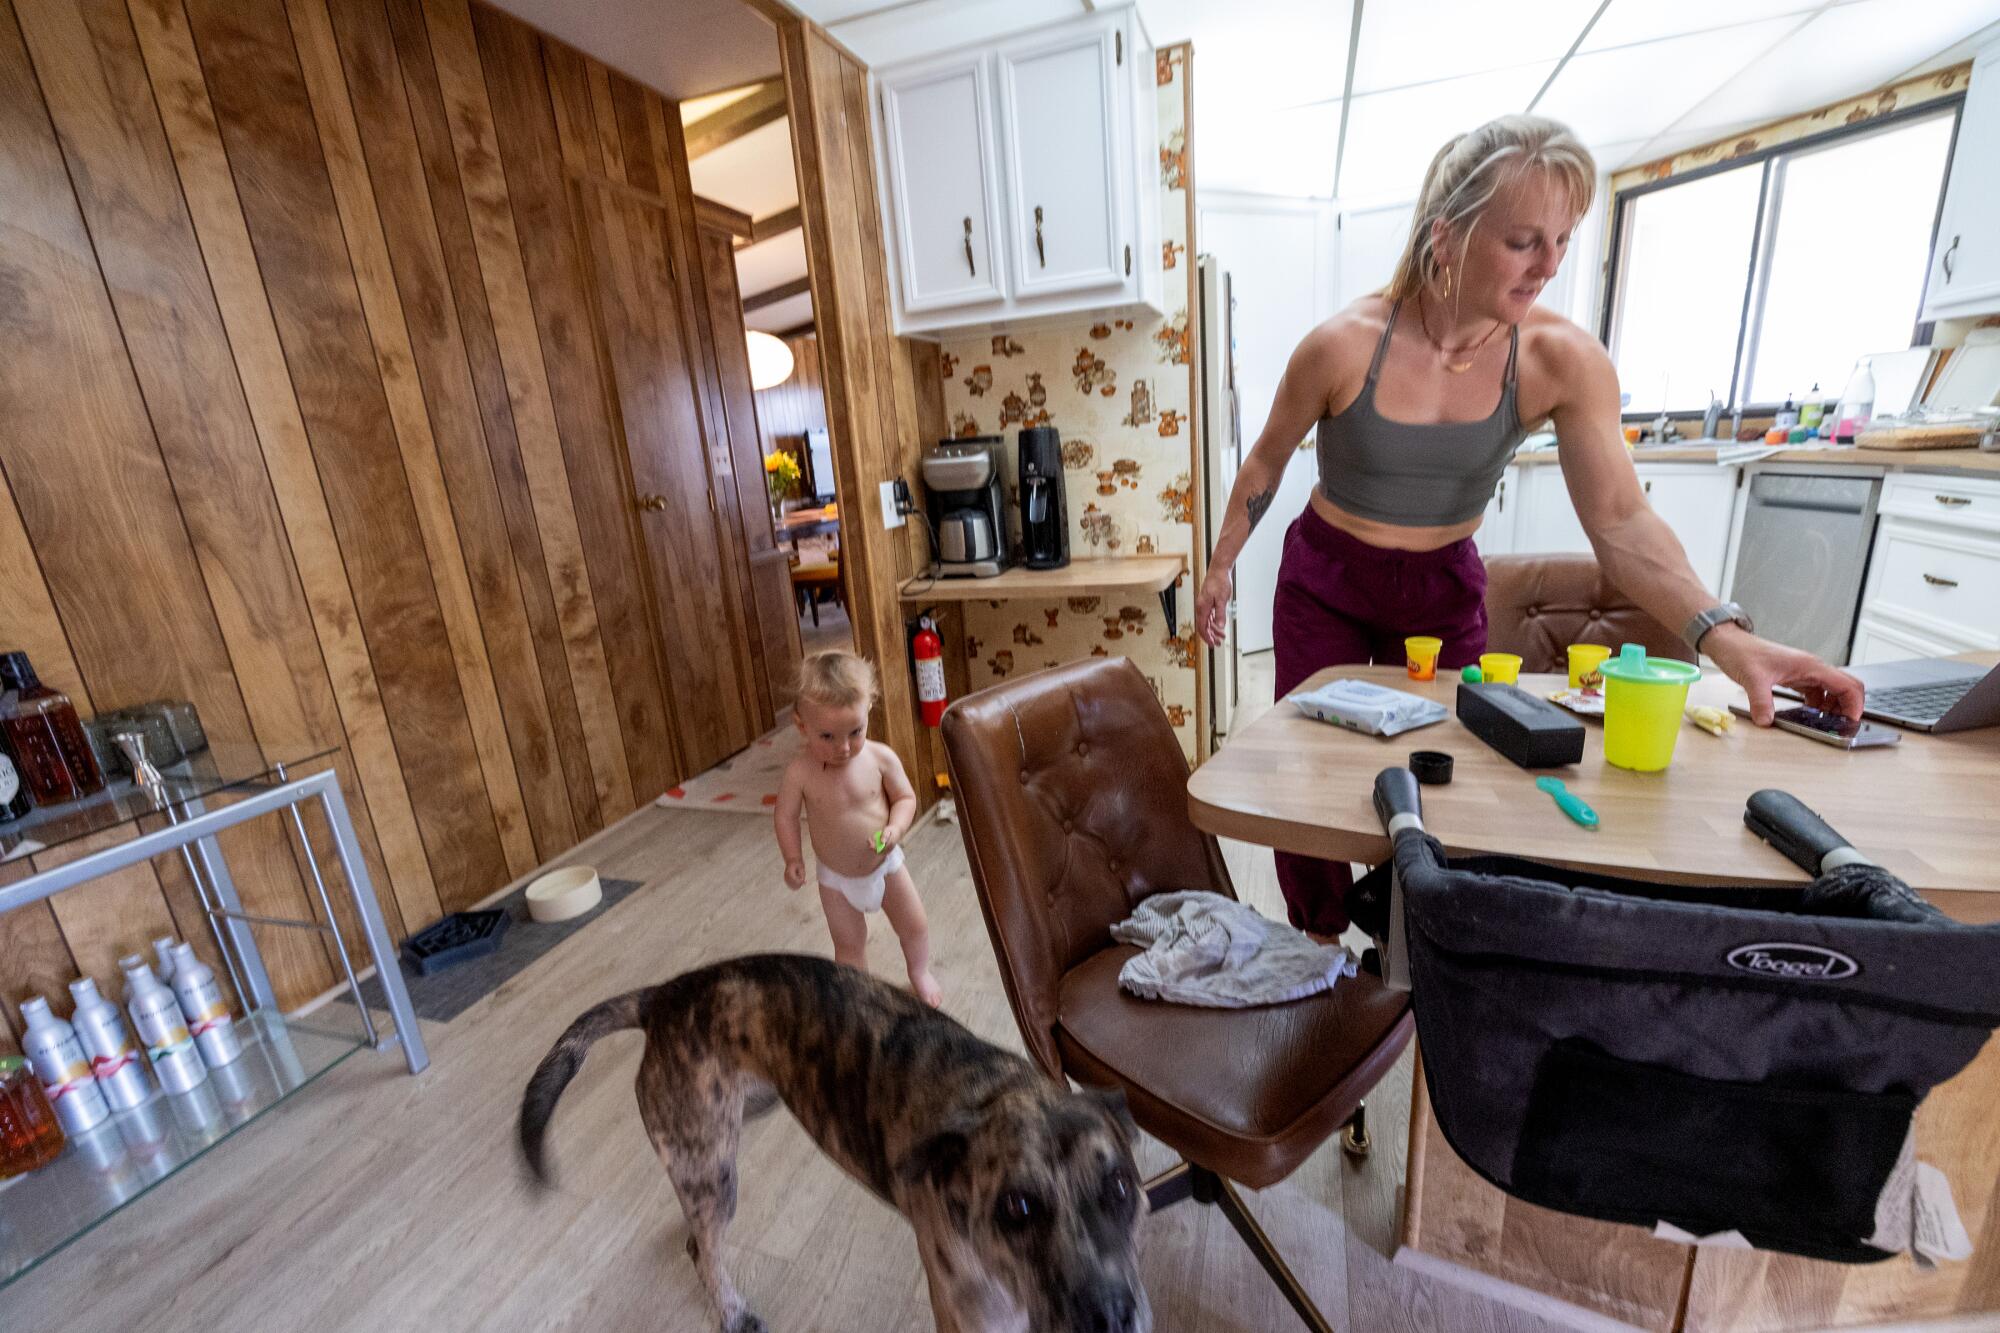 An athletic woman in a kitchen checks her phone with her toddler, in diapers, nearby.  